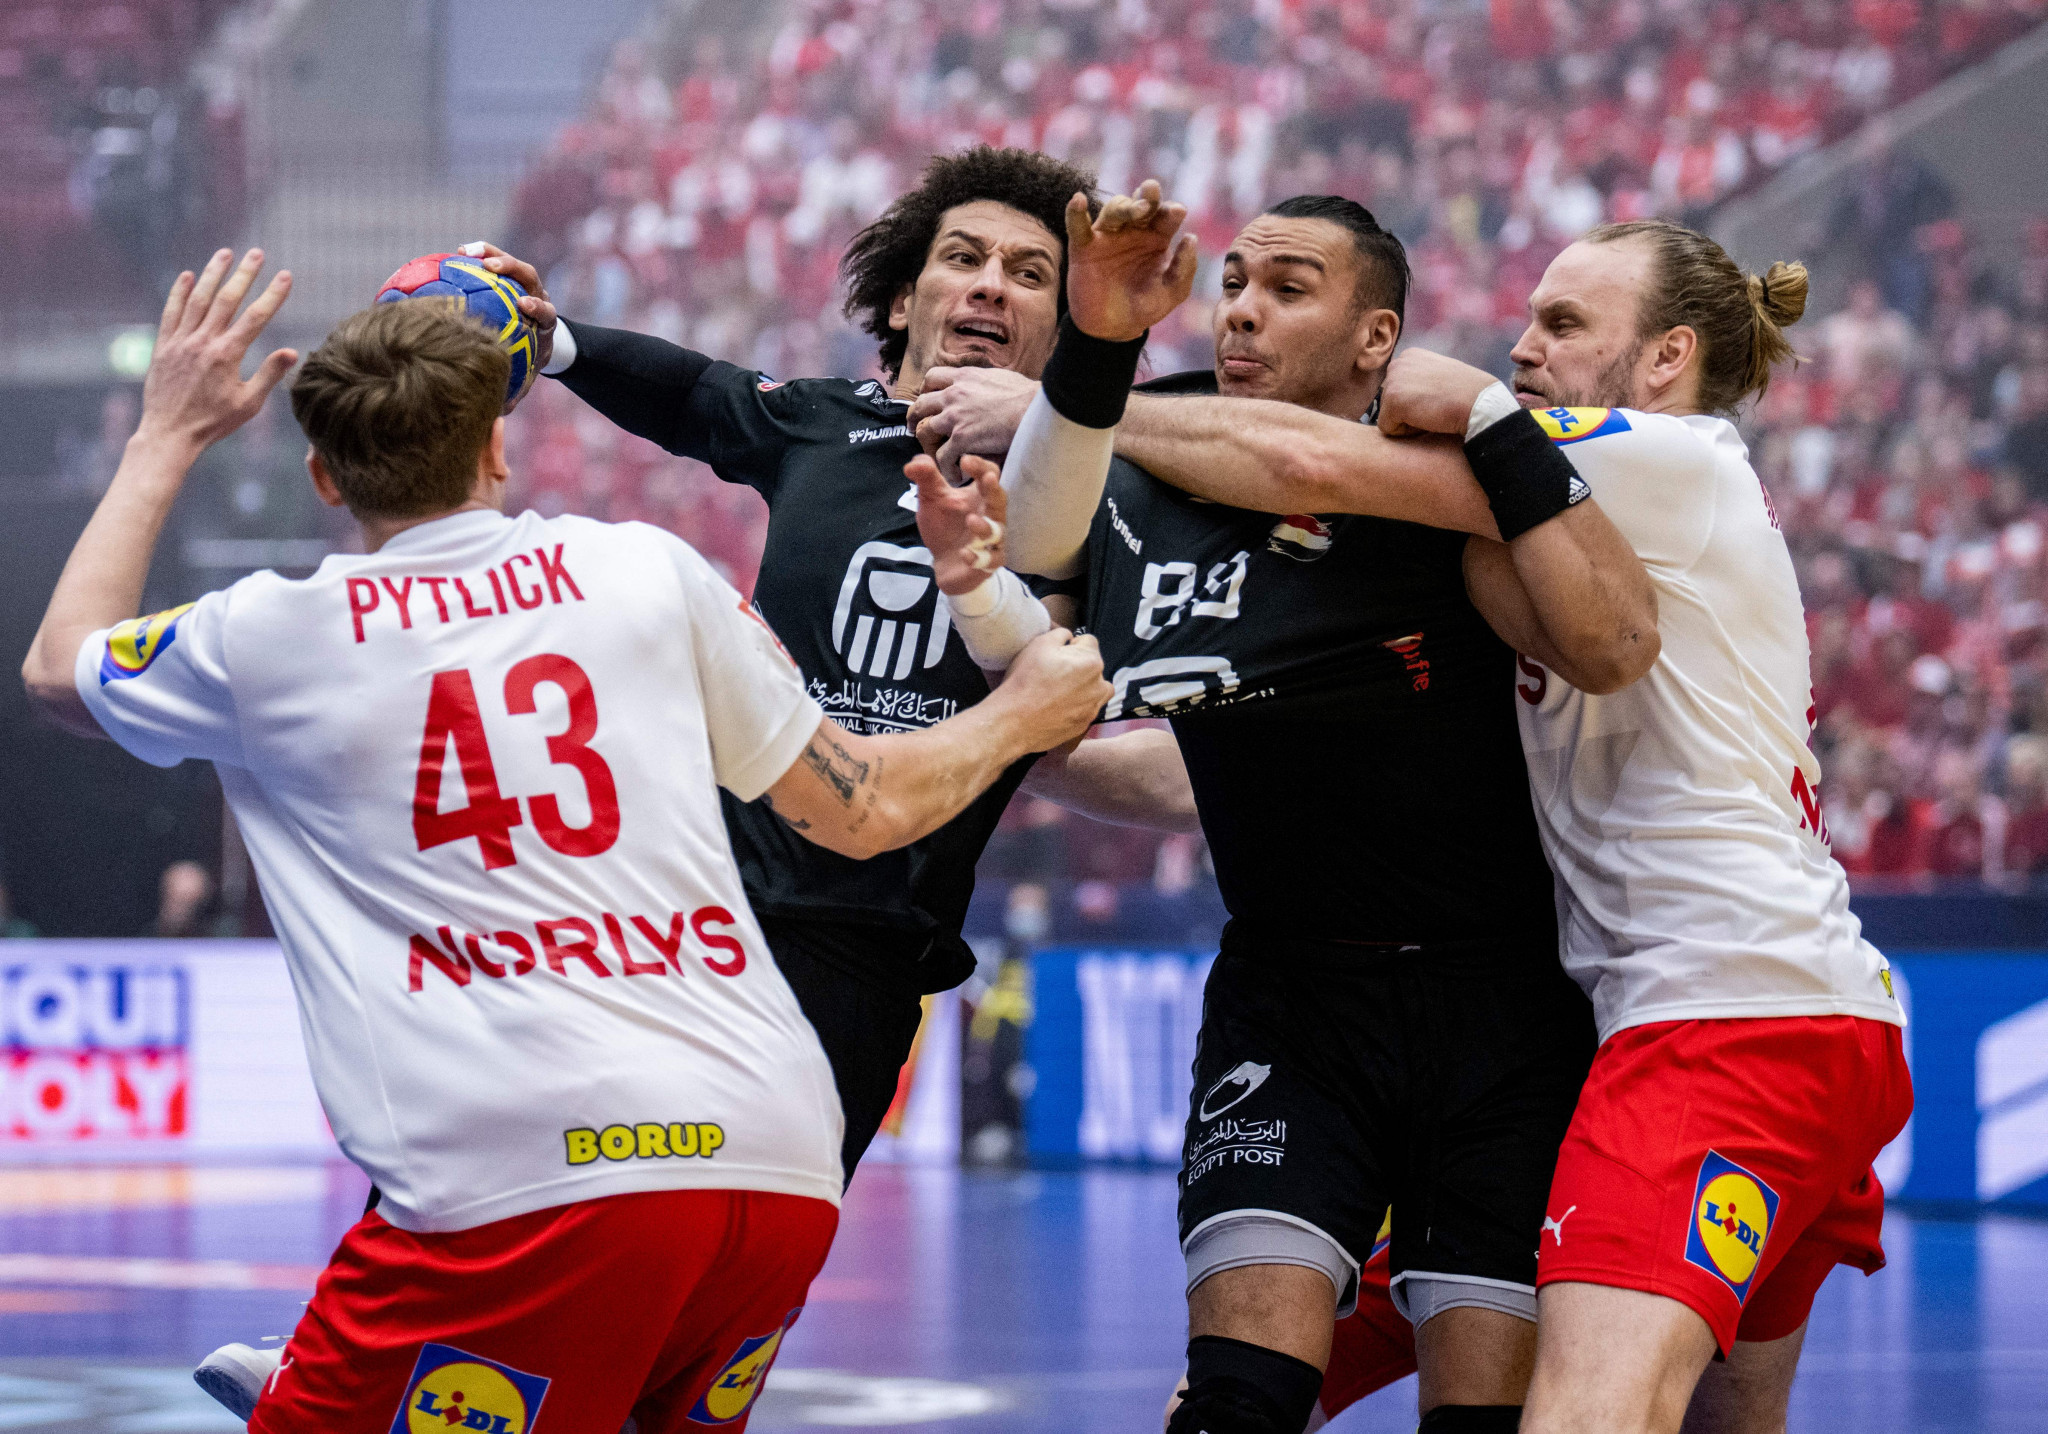 Denmark, playing in white, secured the final quarter-final place at the World Men's Handball Championship ©Getty Images